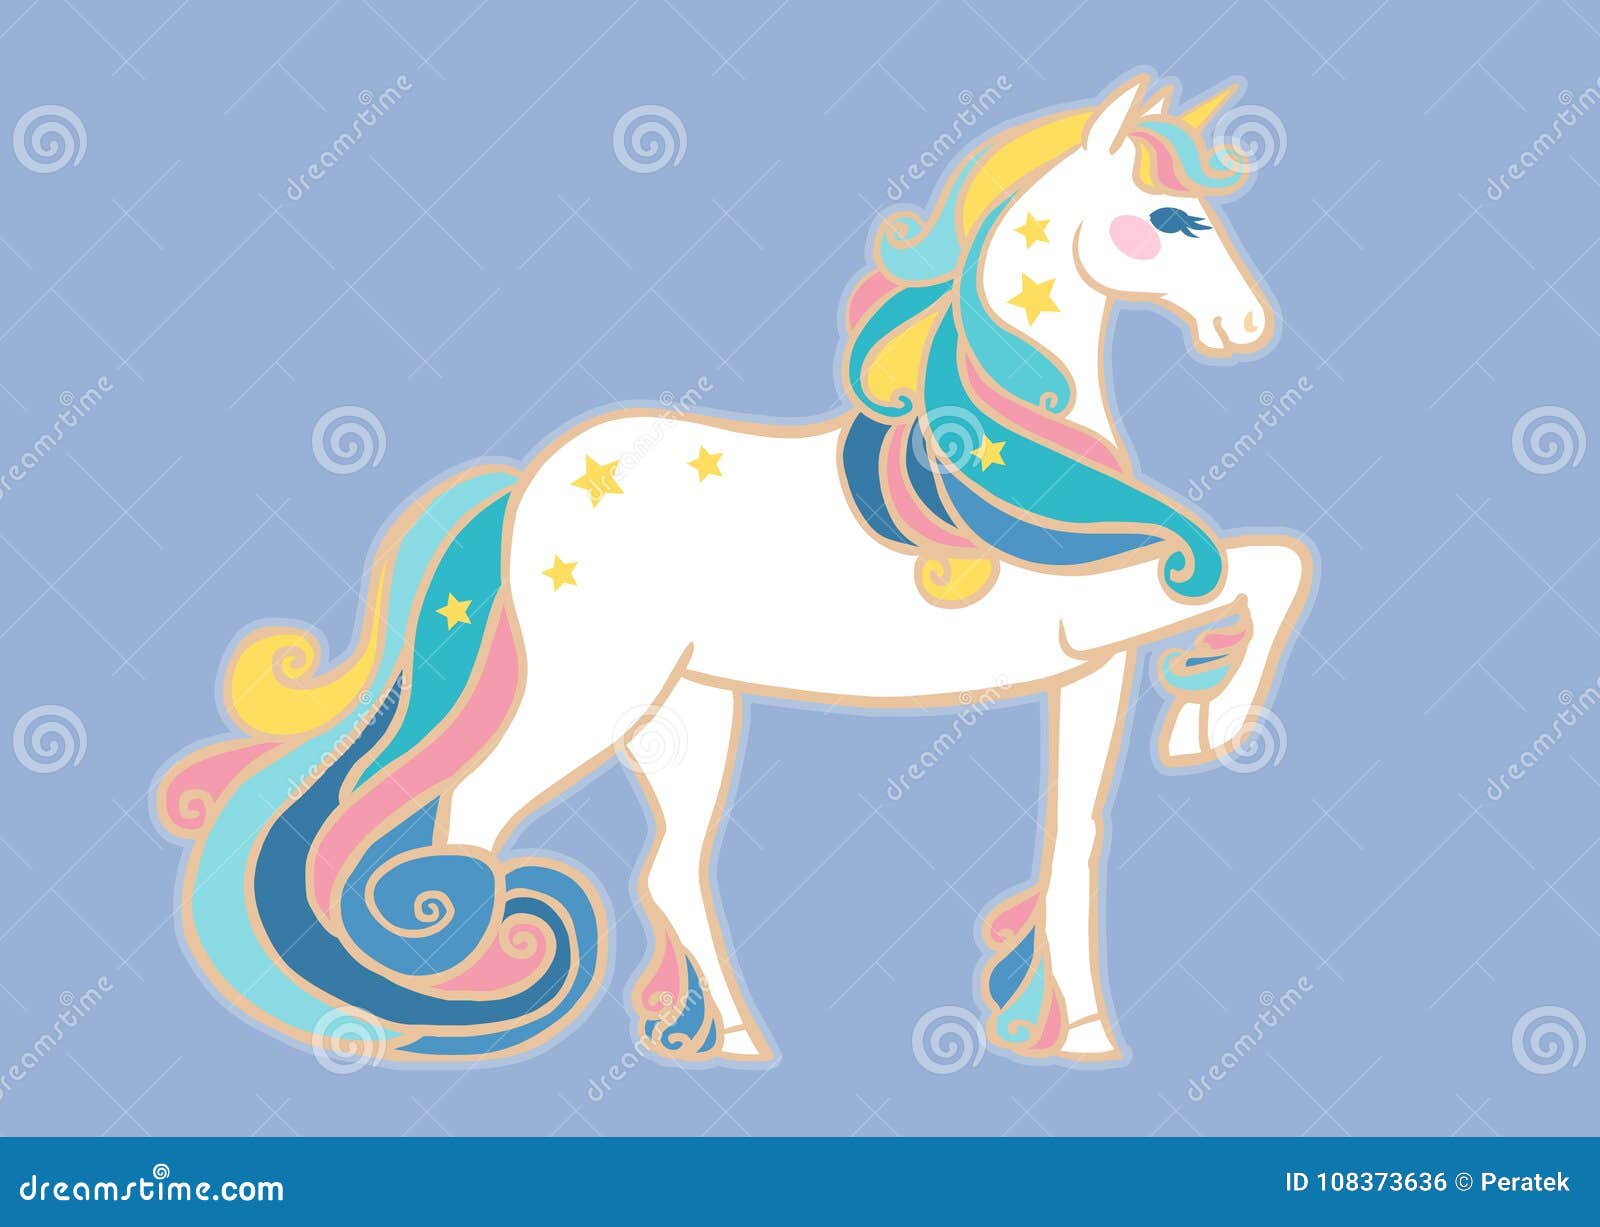 Cute Unicorn with Colorful Mane. Vector Illustration Stock Vector ...